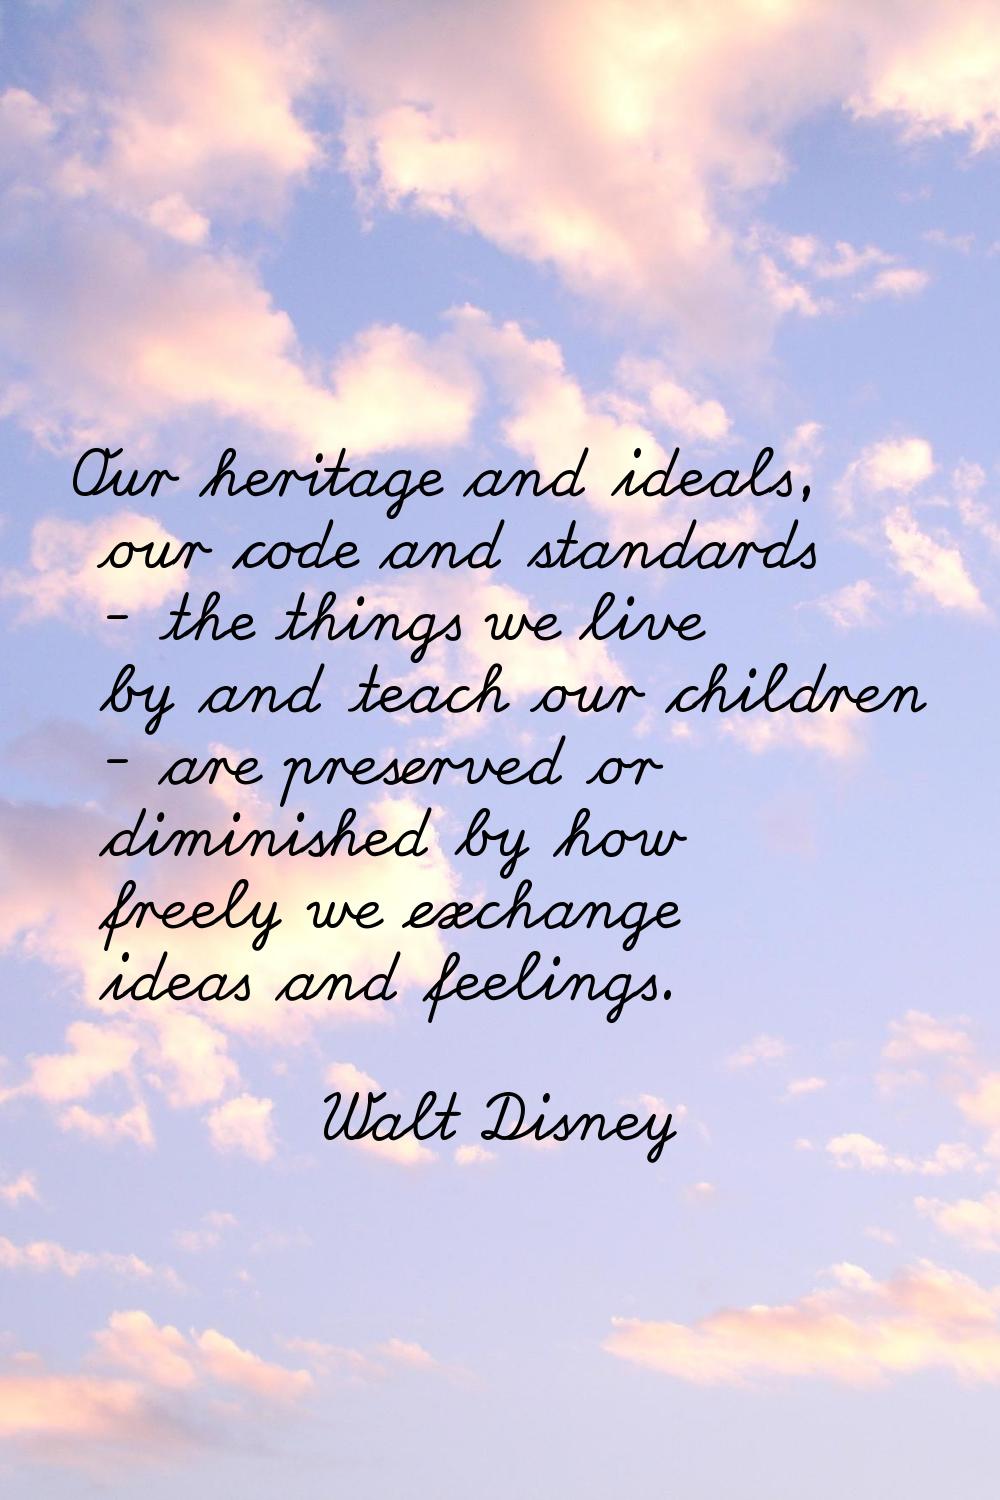 Our heritage and ideals, our code and standards - the things we live by and teach our children - ar